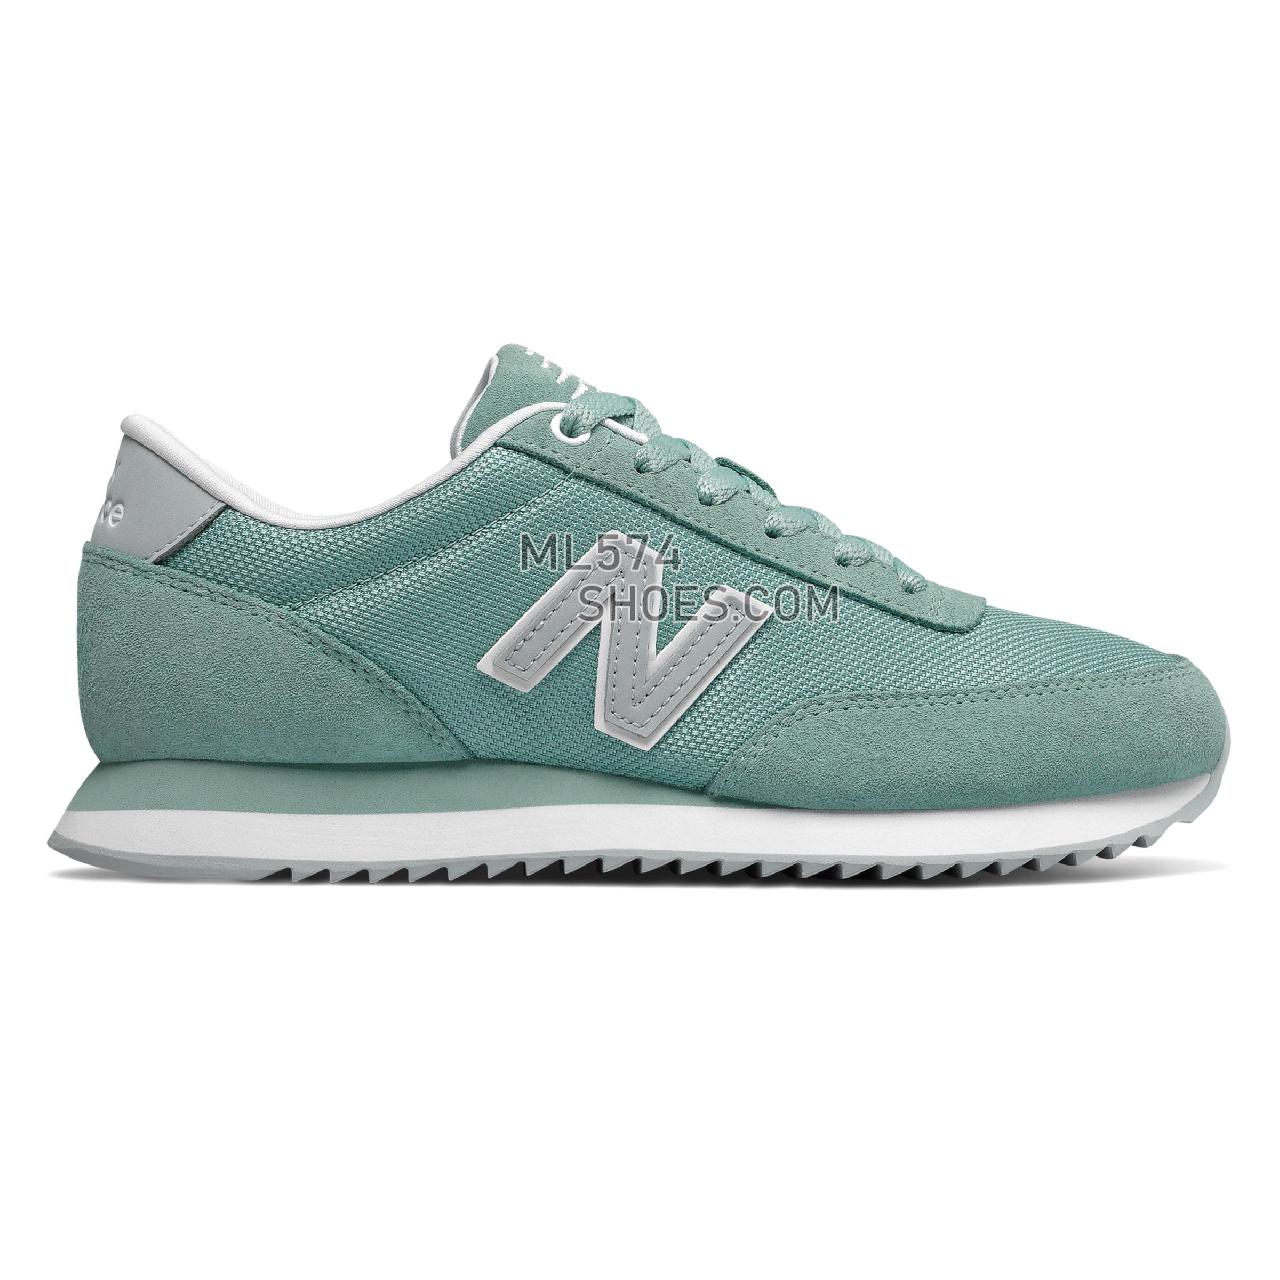 New Balance 501 Ripple Sole - Women's 501 - Classic Mineral Sage with Light Cyclone - WZ501NRB